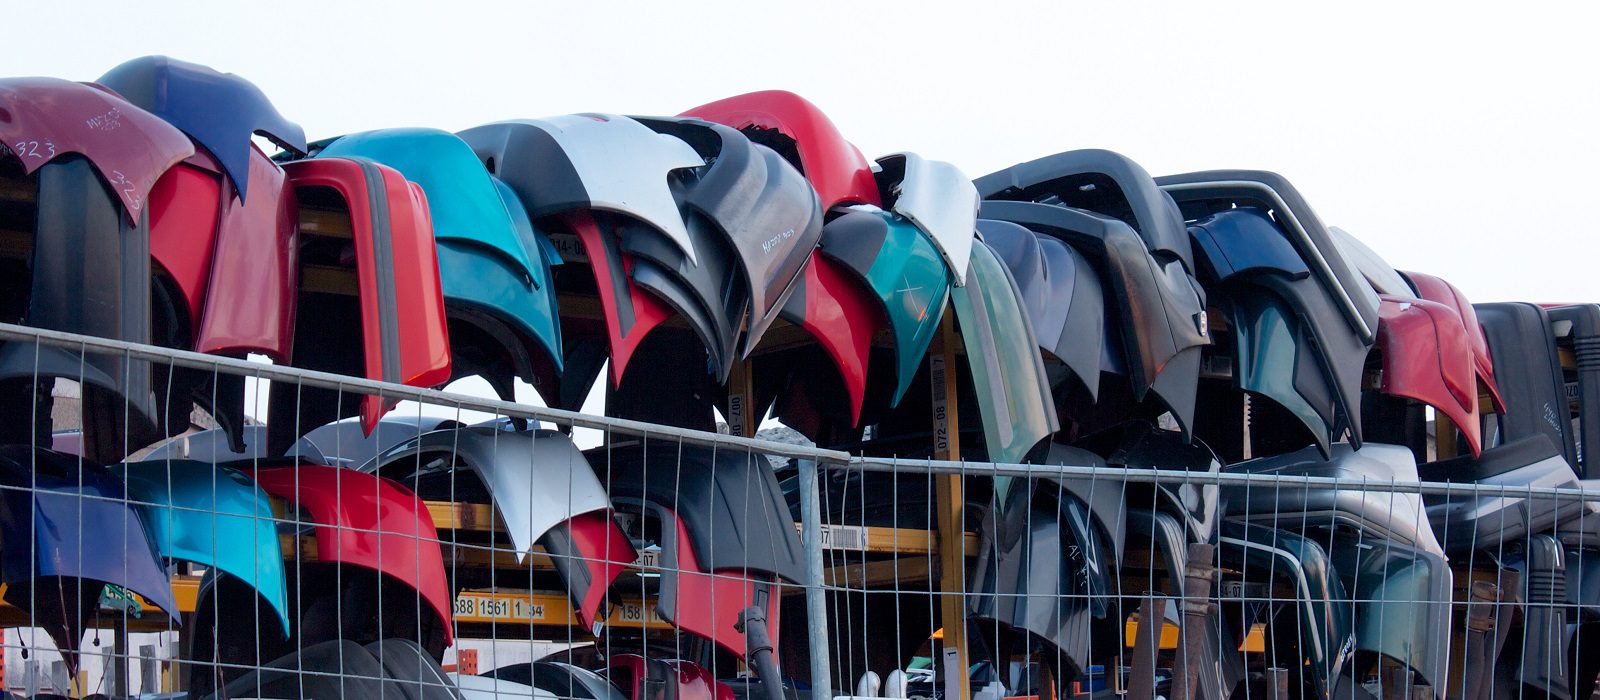 Used car fenders on a rack, waiting to be re-used for accident cars